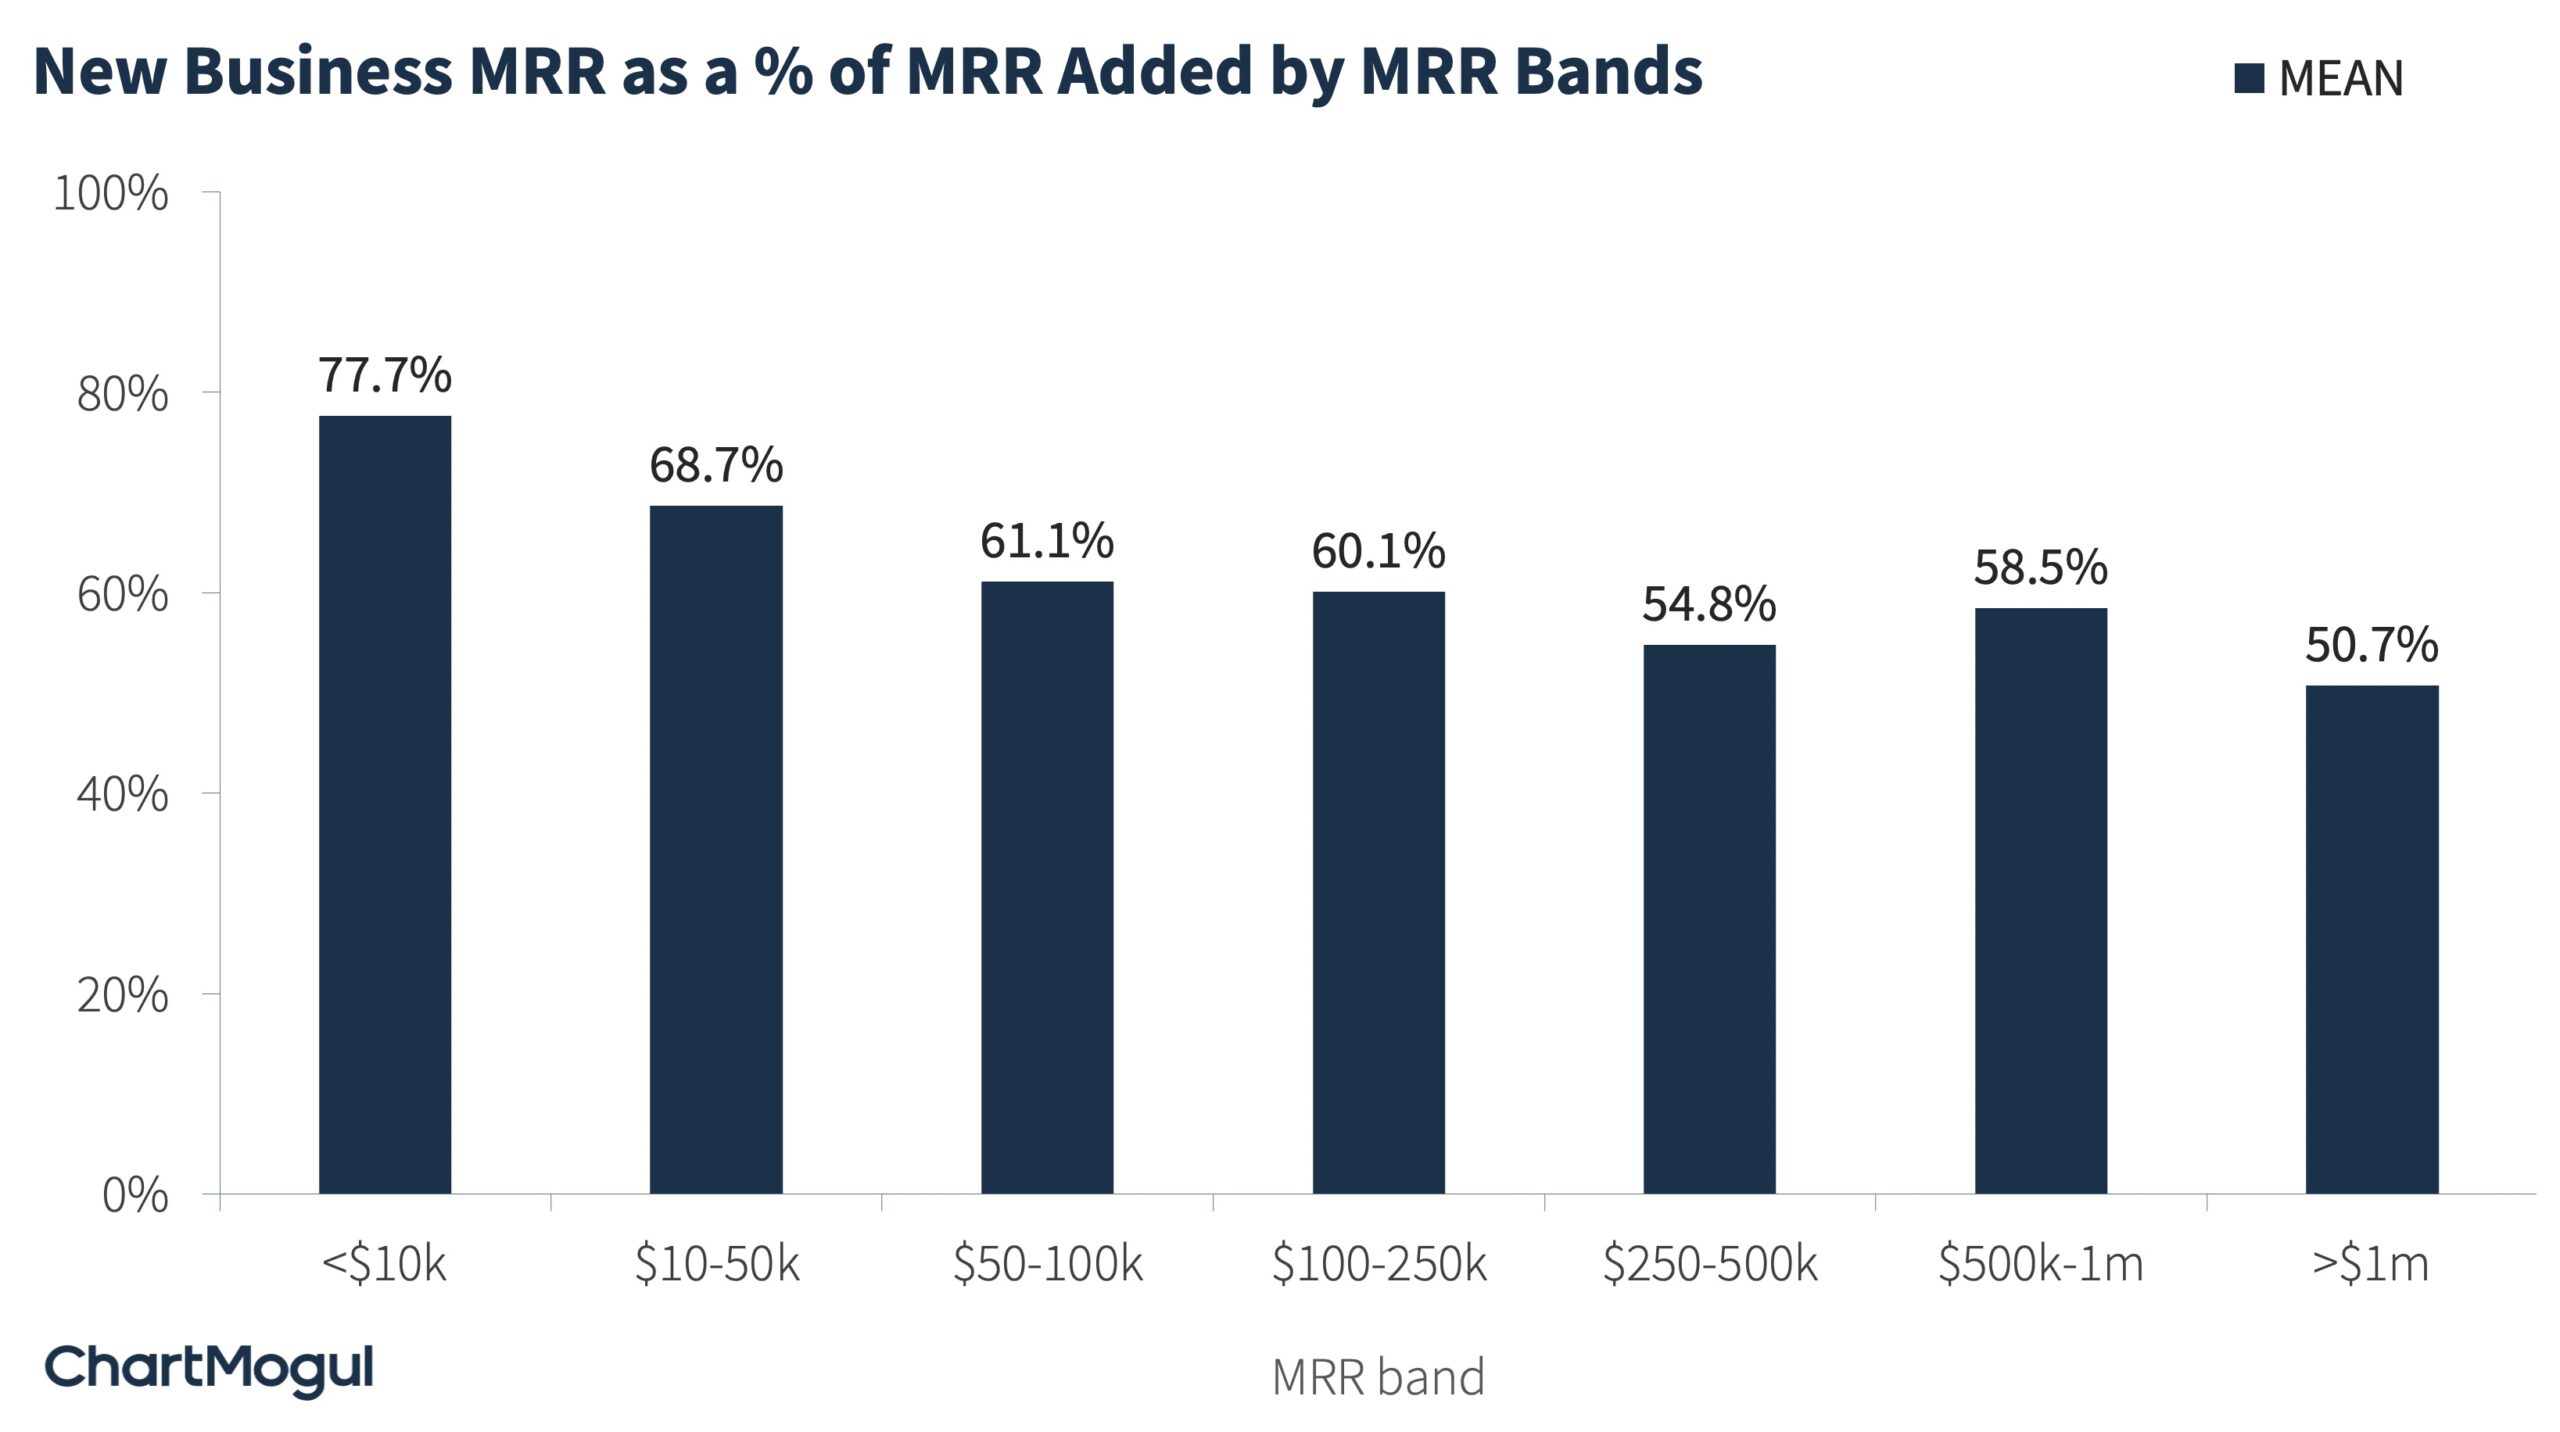 New Business MRR as a % of MRR Added